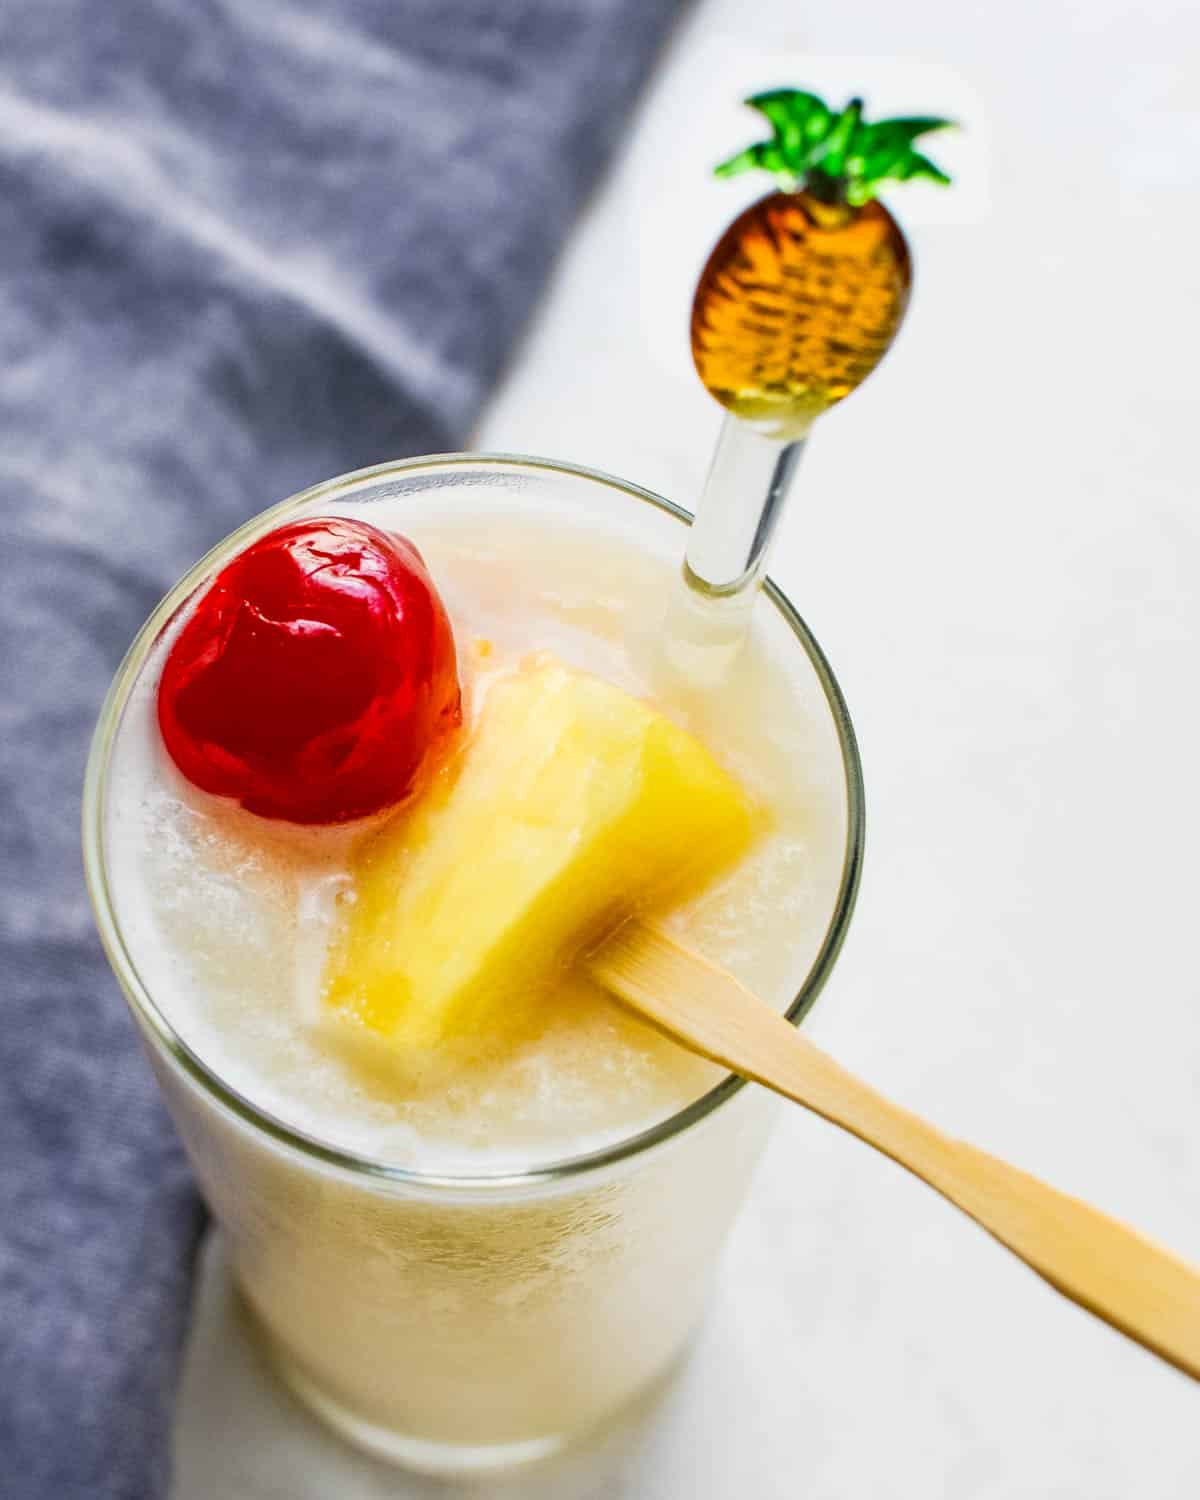 A tallboy pina colada with cherry and pineapple garnish.